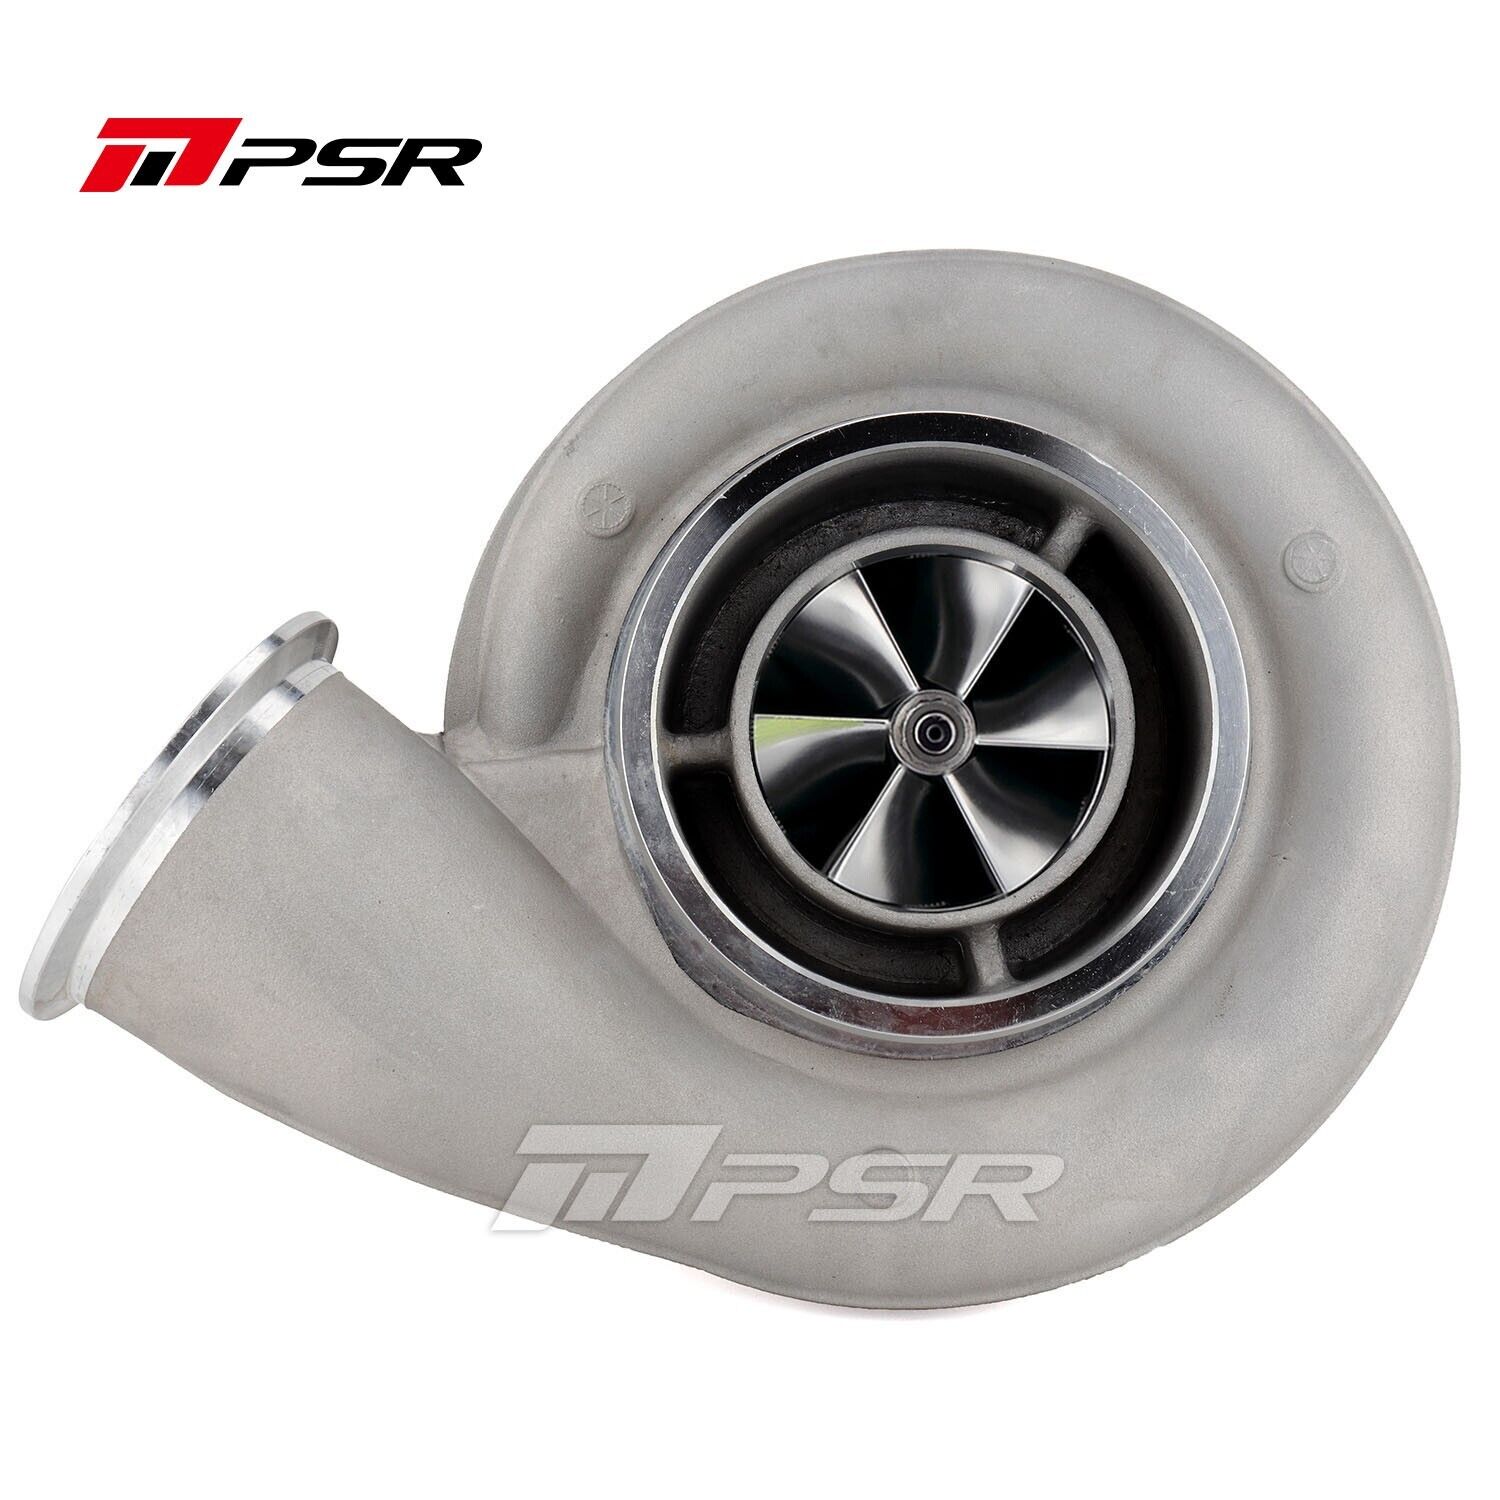 Pulsar S400 467 Supercore 67mm Billet Wheel 83*74mm Turbine Without Real Housing